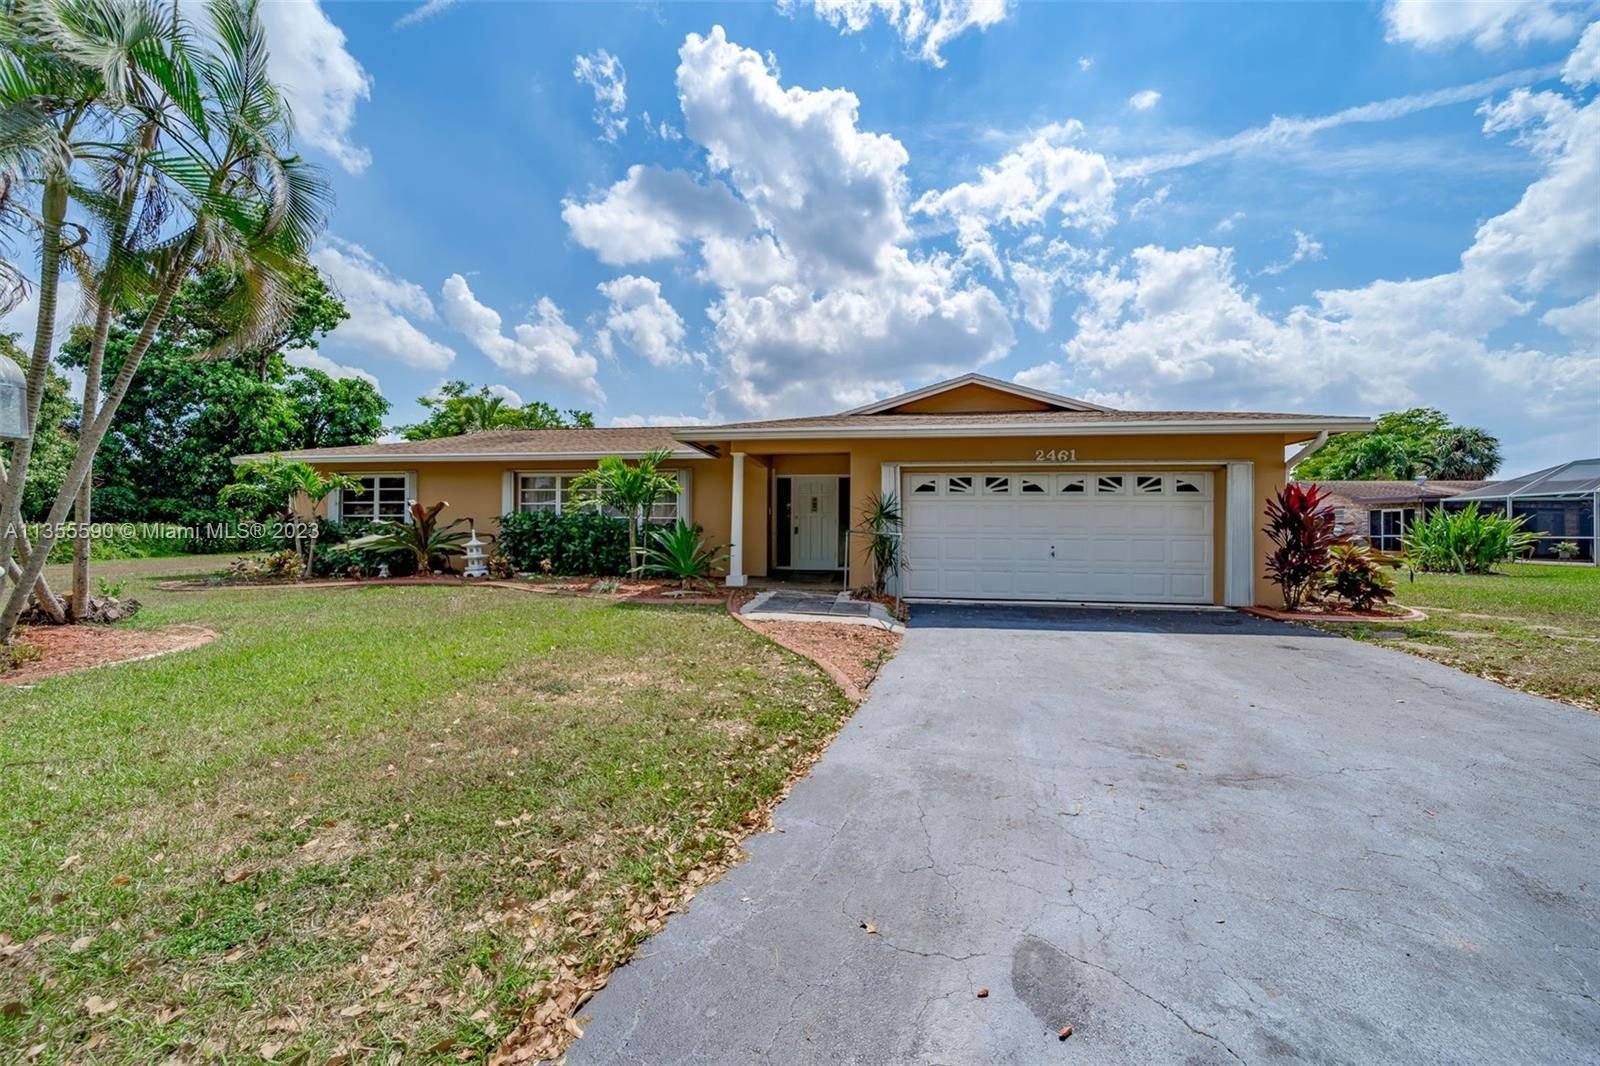 Real estate property located at 2461 85th Ter, Broward County, Davie, FL